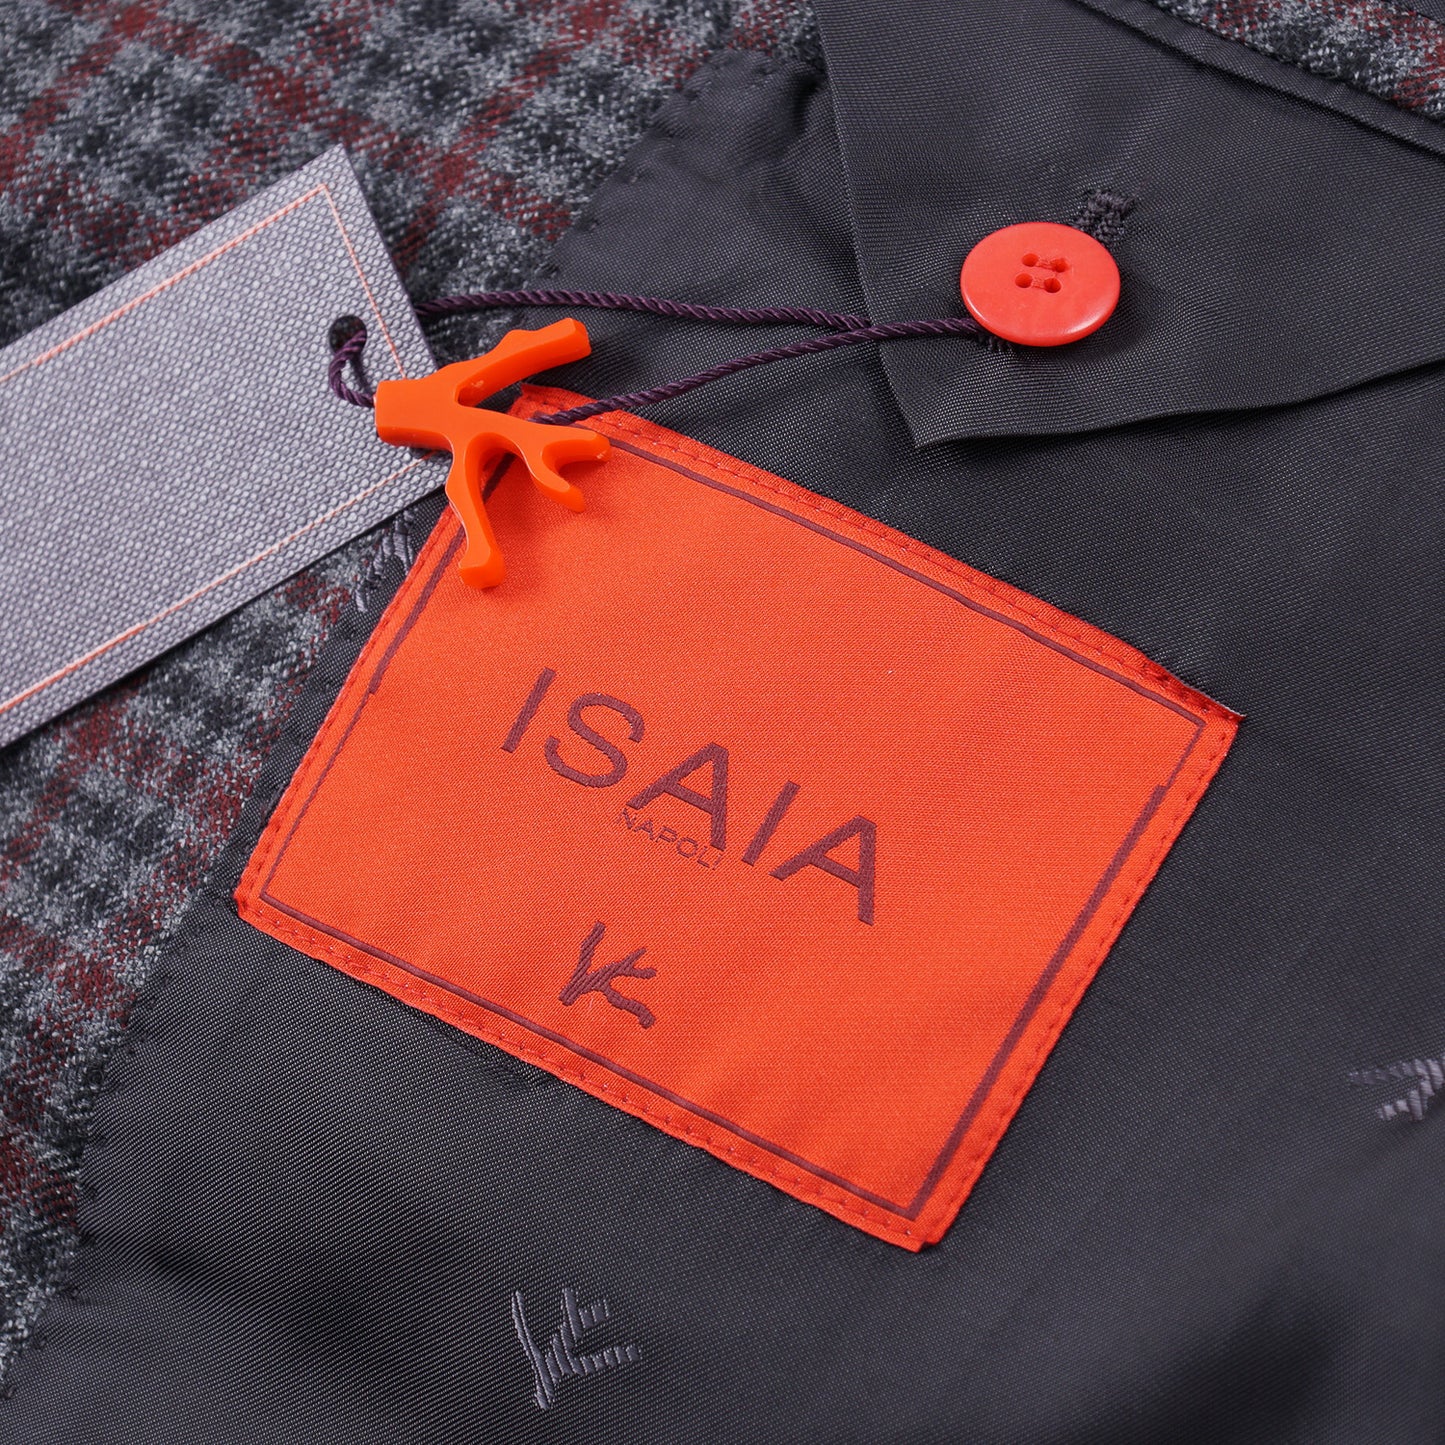 Isaia Damier Check Wool Suit - Top Shelf Apparel